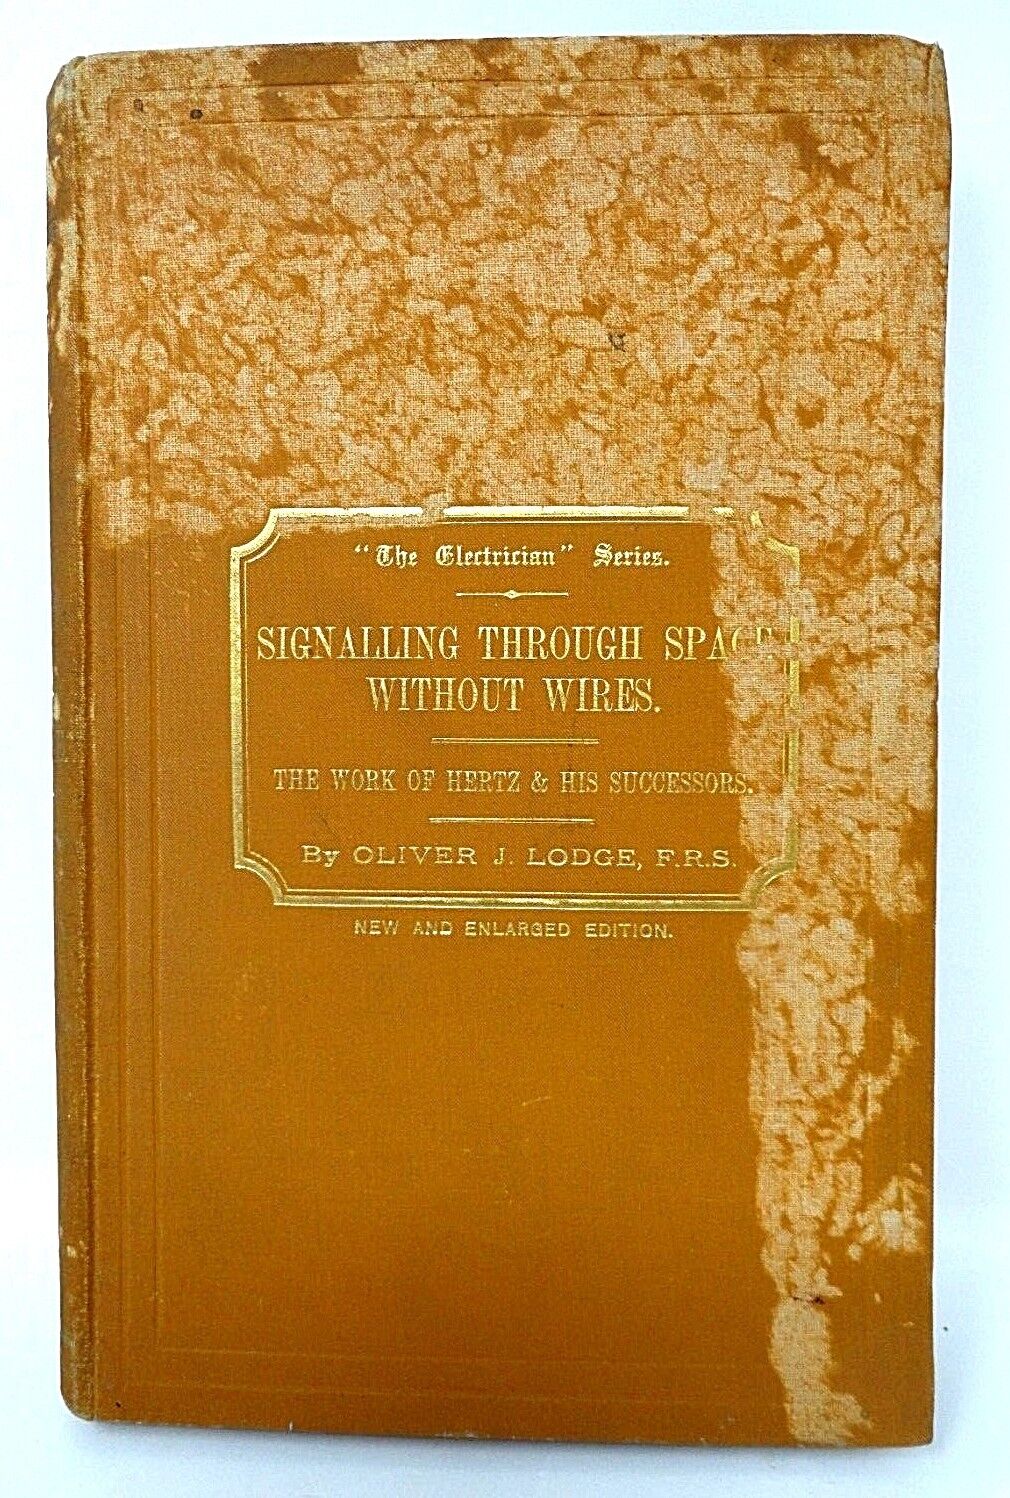 Radio - Signaling Through Space Without Wires - 1903 - Oliver J Lodge - Rare